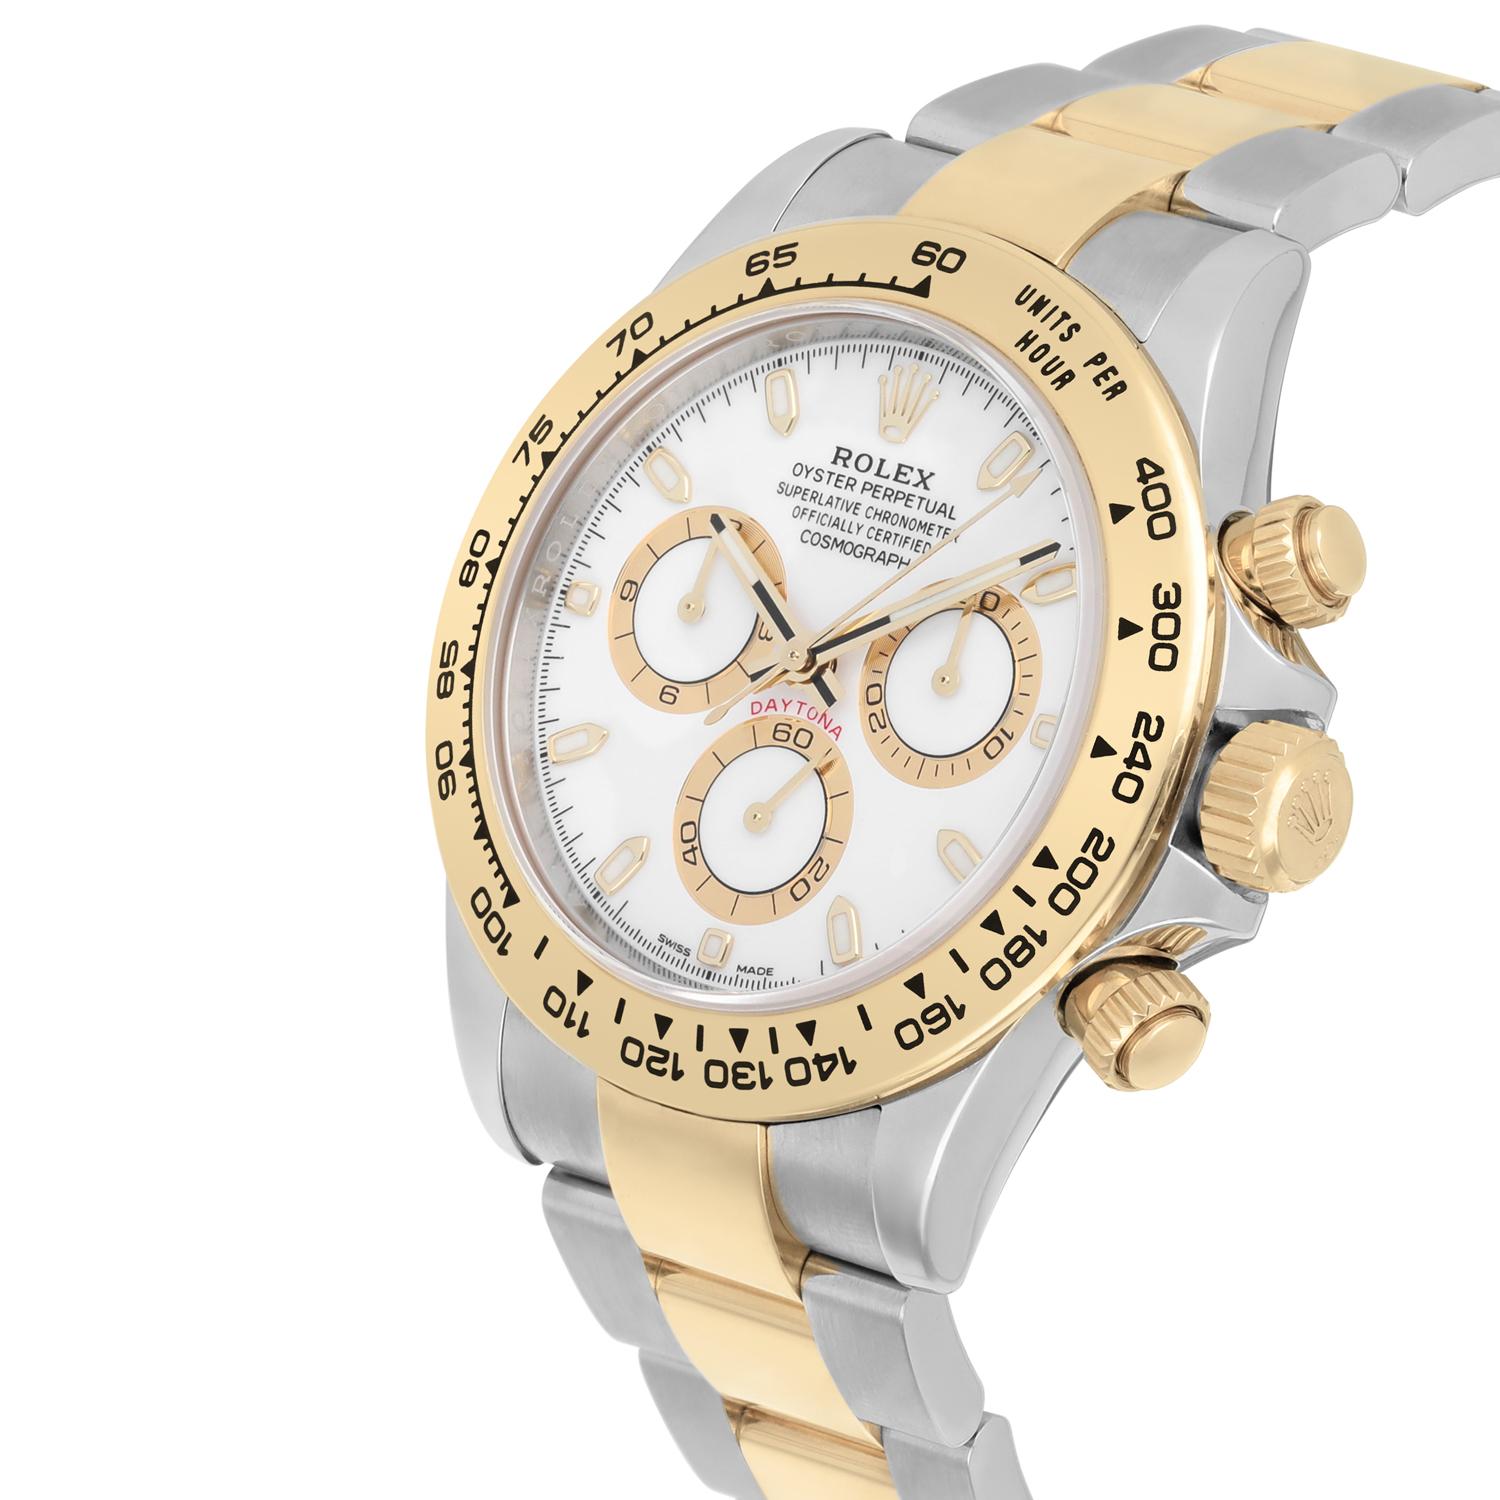 Rolex Cosmograph Daytona Stainless Steel/Yellow Gold White Dial Watch 116503 For Sale 1